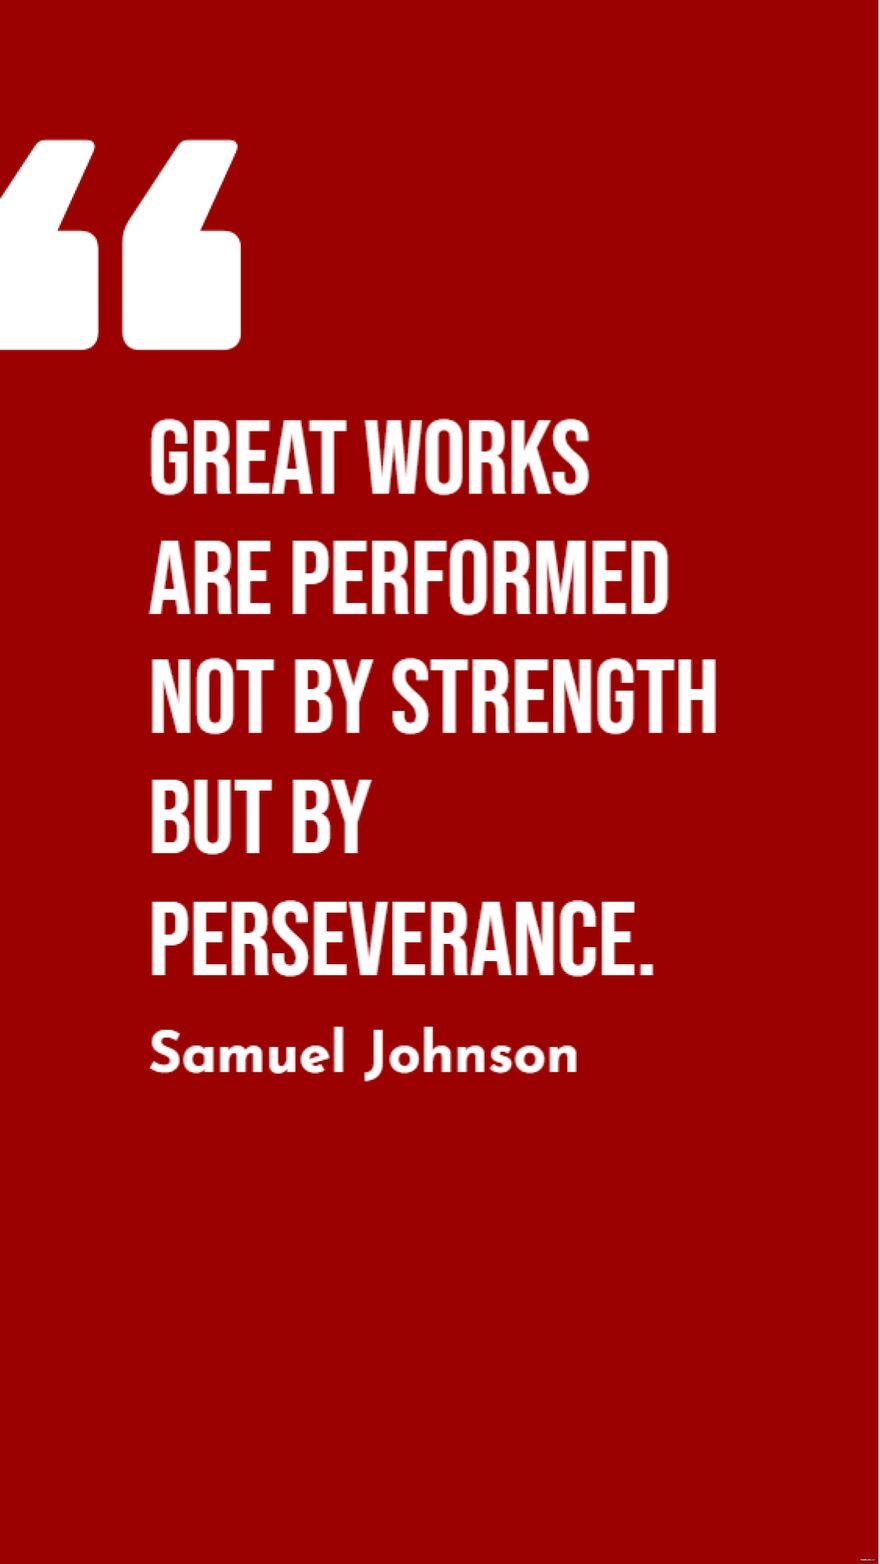 Samuel Johnson - Great works are performed not by strength but by perseverance. in JPG